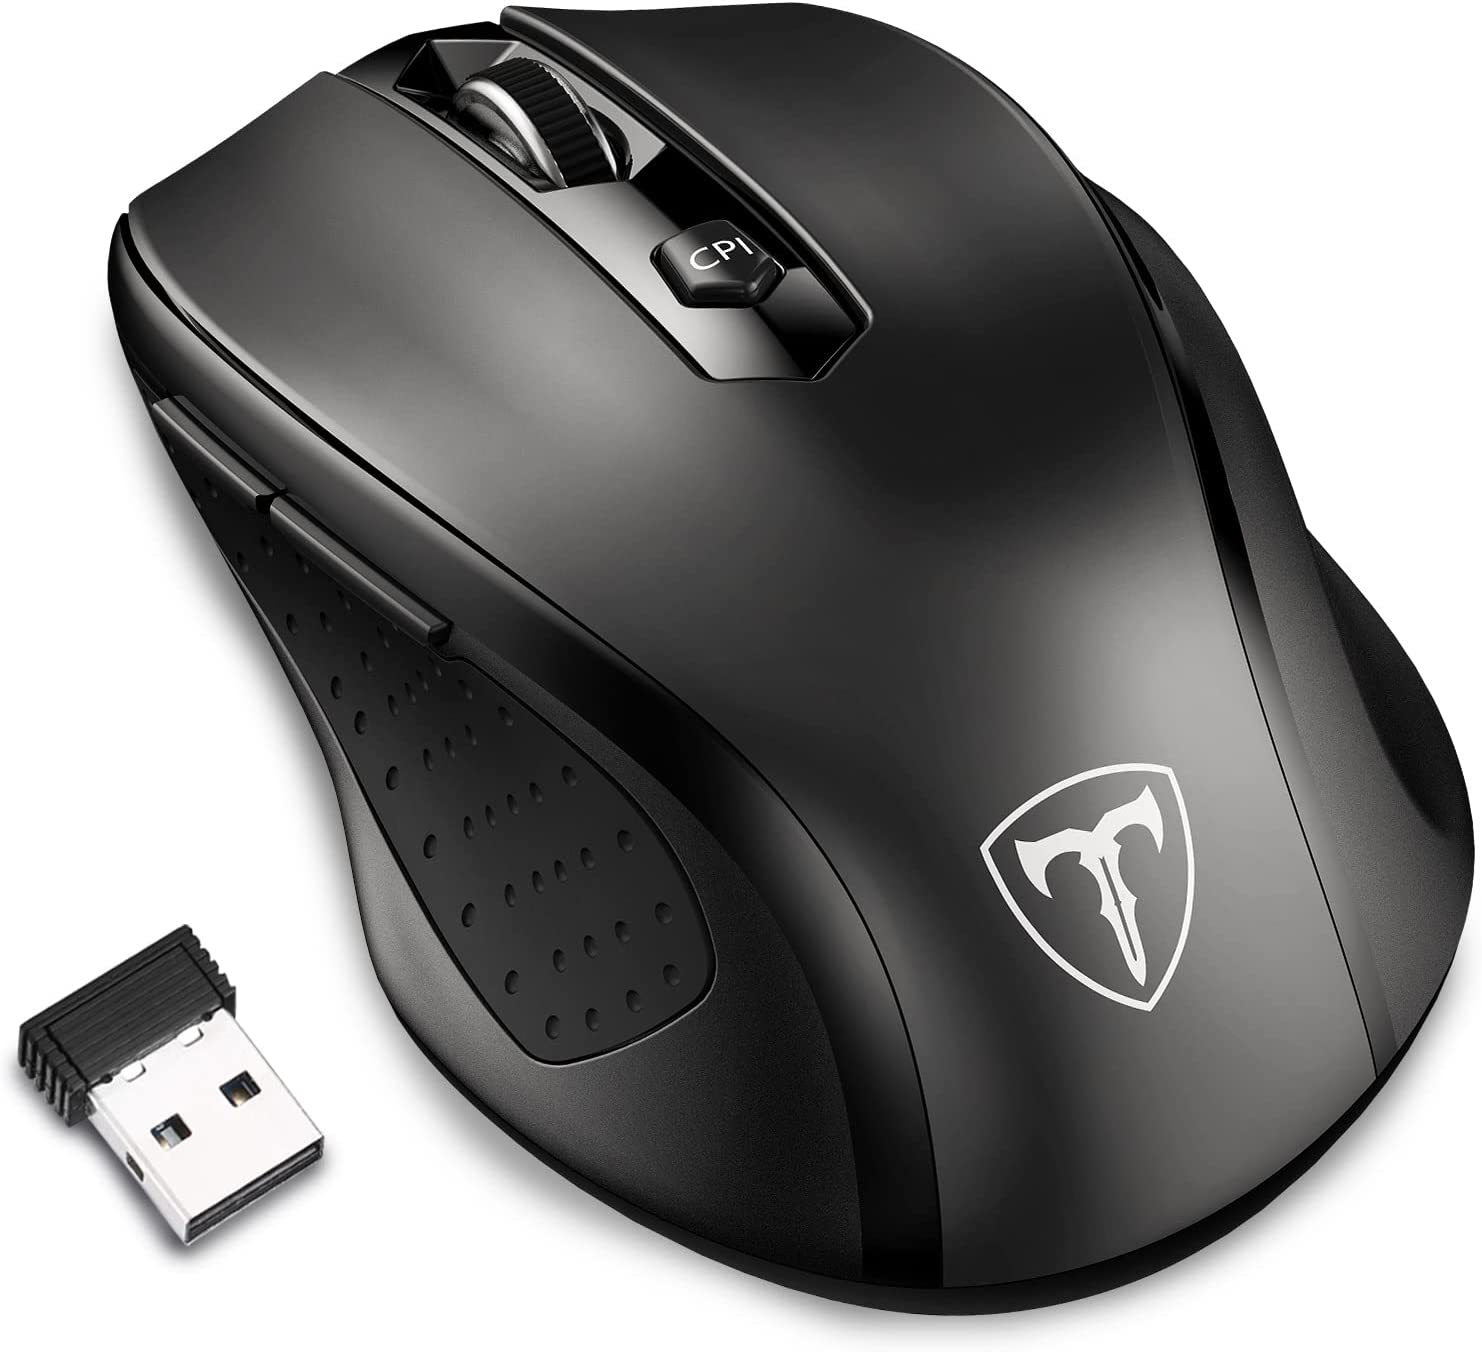 ''Wireless Mouse for Laptop,WEEMSBOX 2.4G COMPUTER Mouse Ergonomic Mouse with USB Receiver, Finger Re